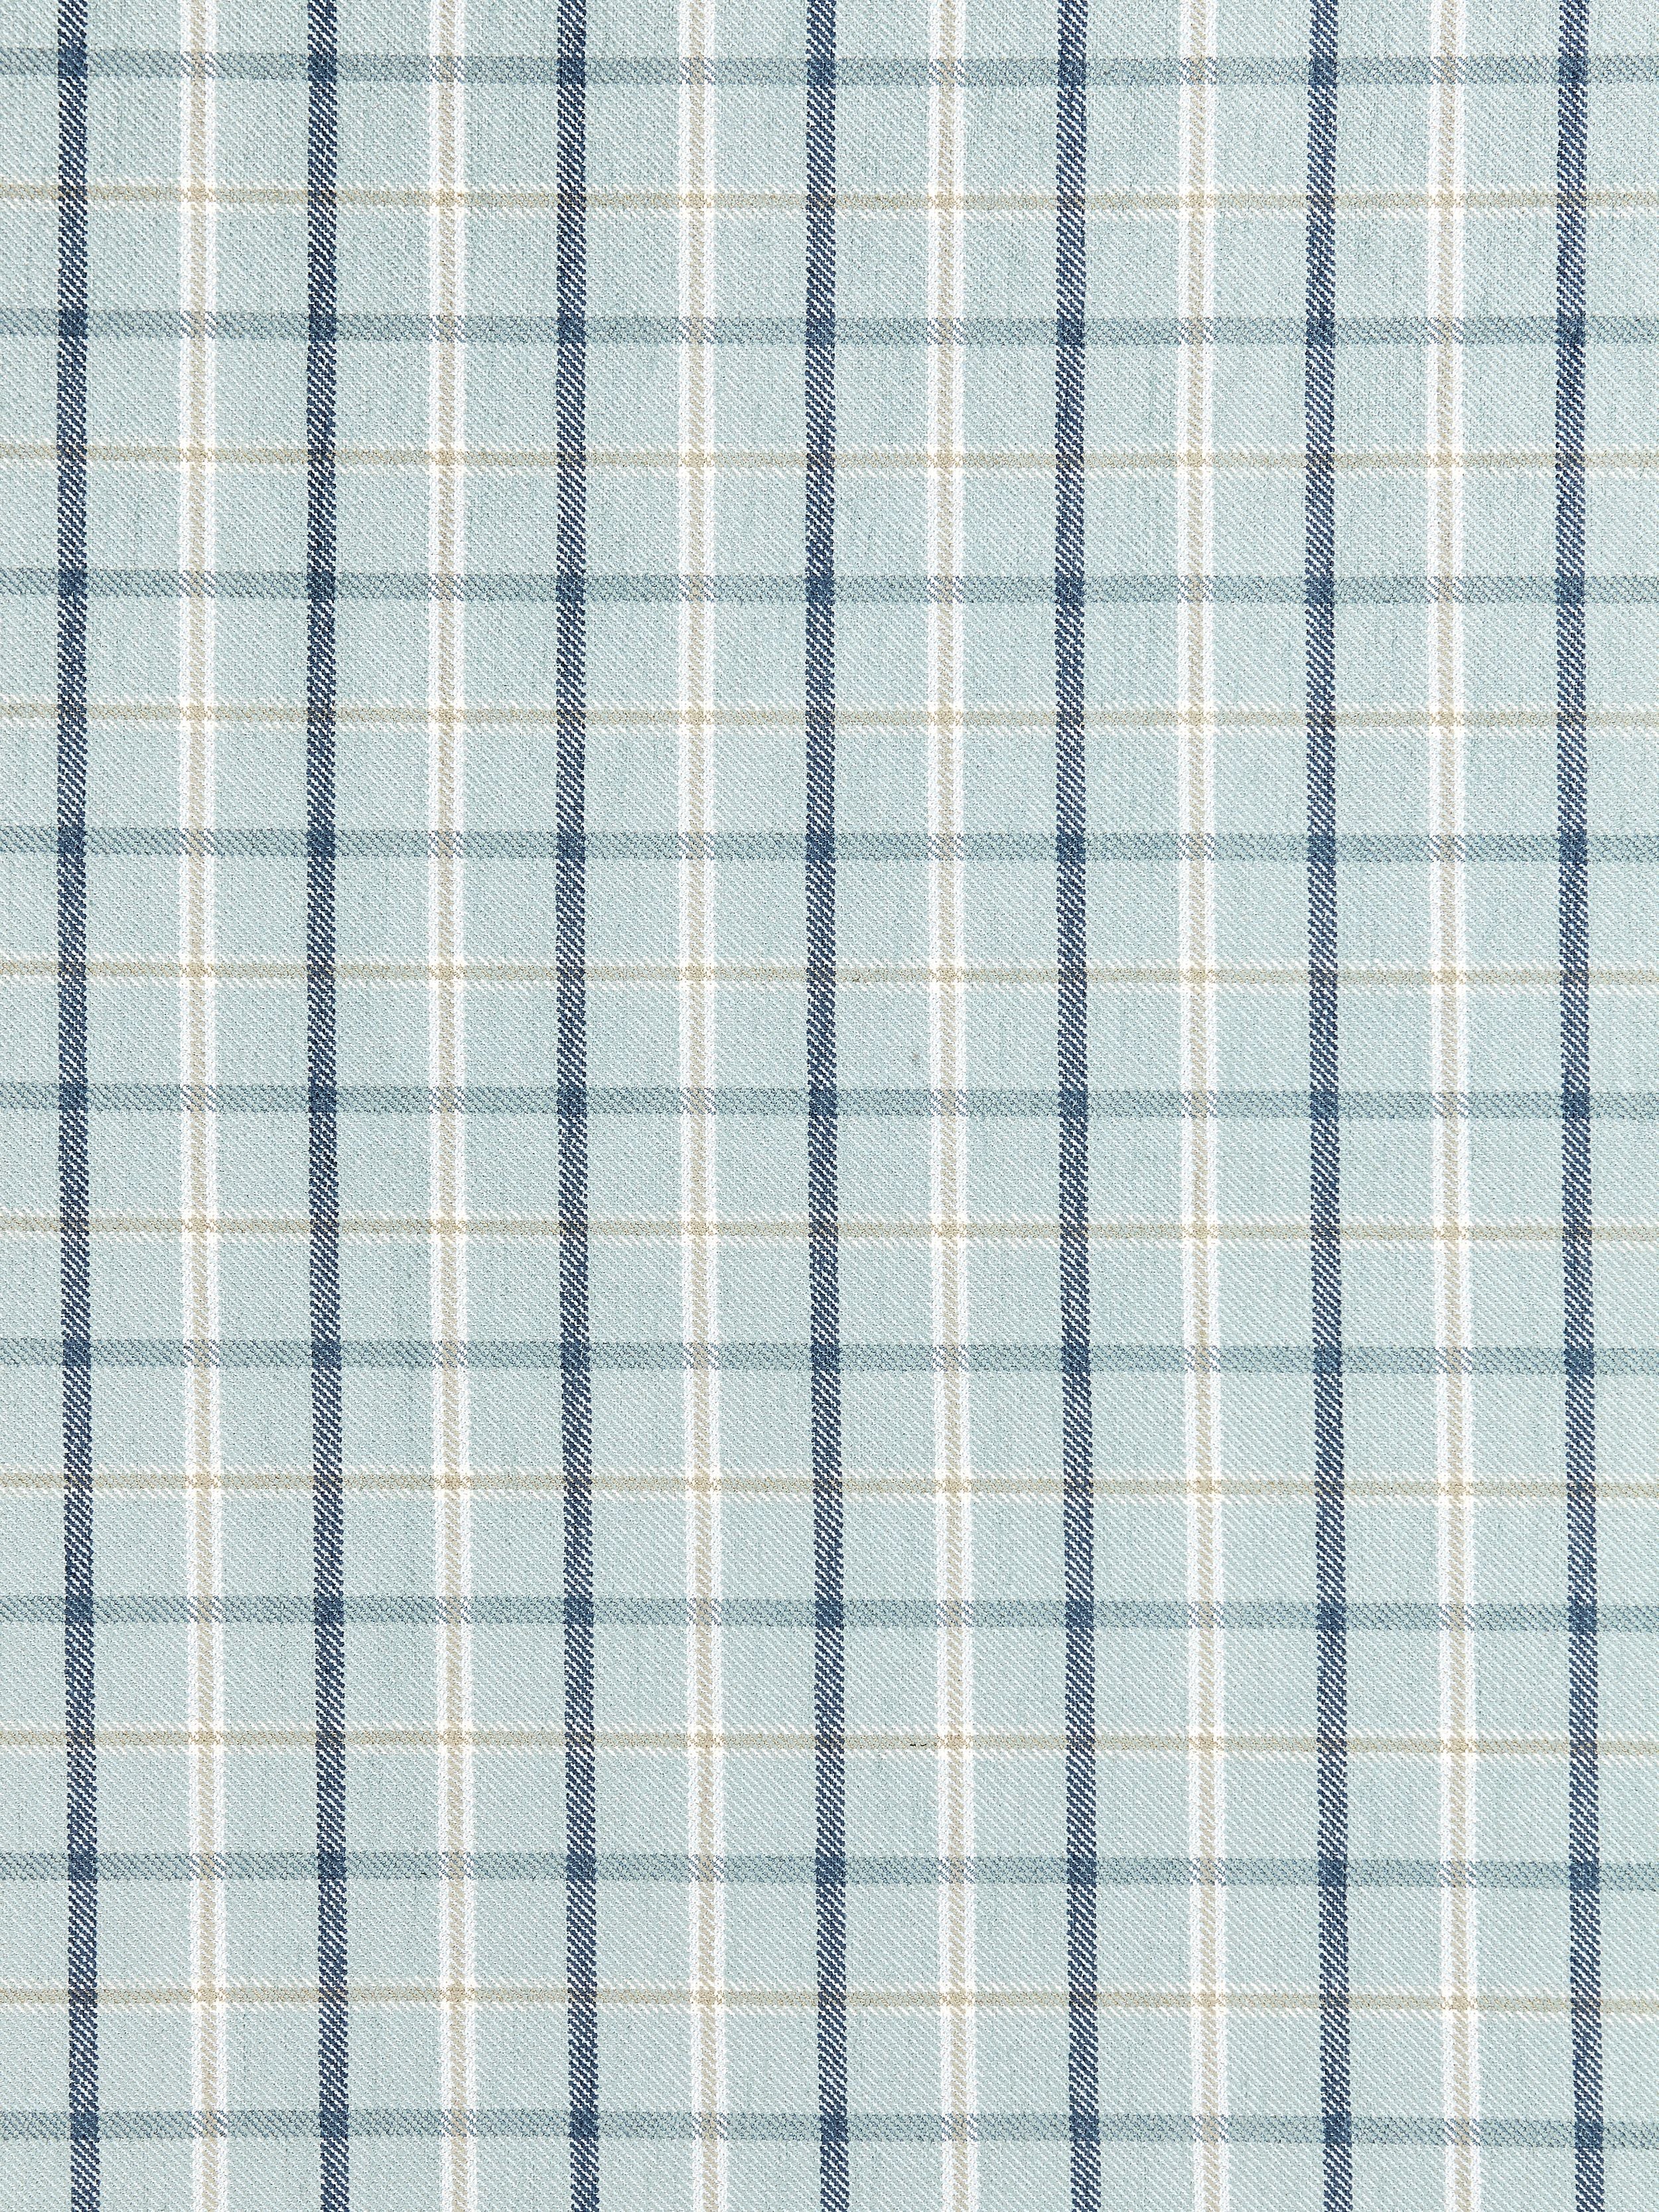 Bristol Plaid fabric in mineral color - pattern number SC 000227121 - by Scalamandre in the Scalamandre Fabrics Book 1 collection